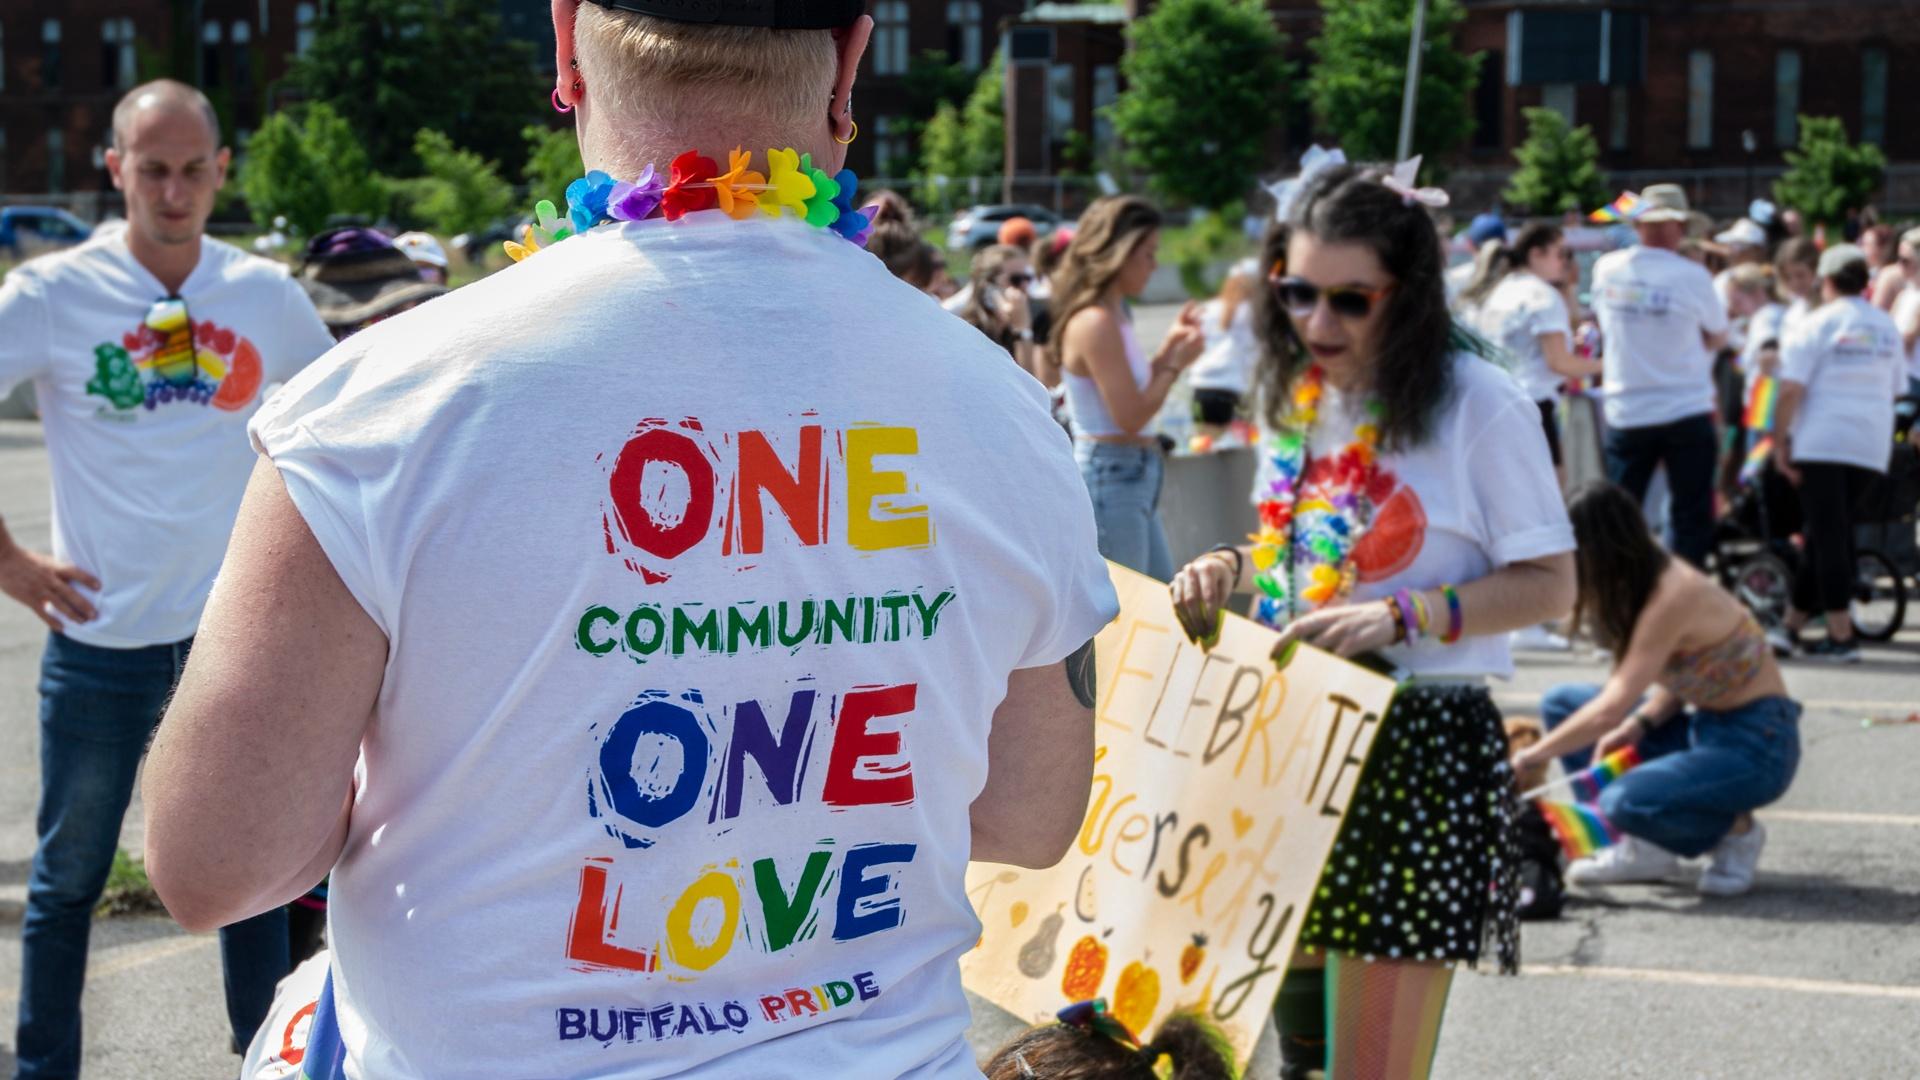 shirt with " One Community, One Love, Buffalo Pride"